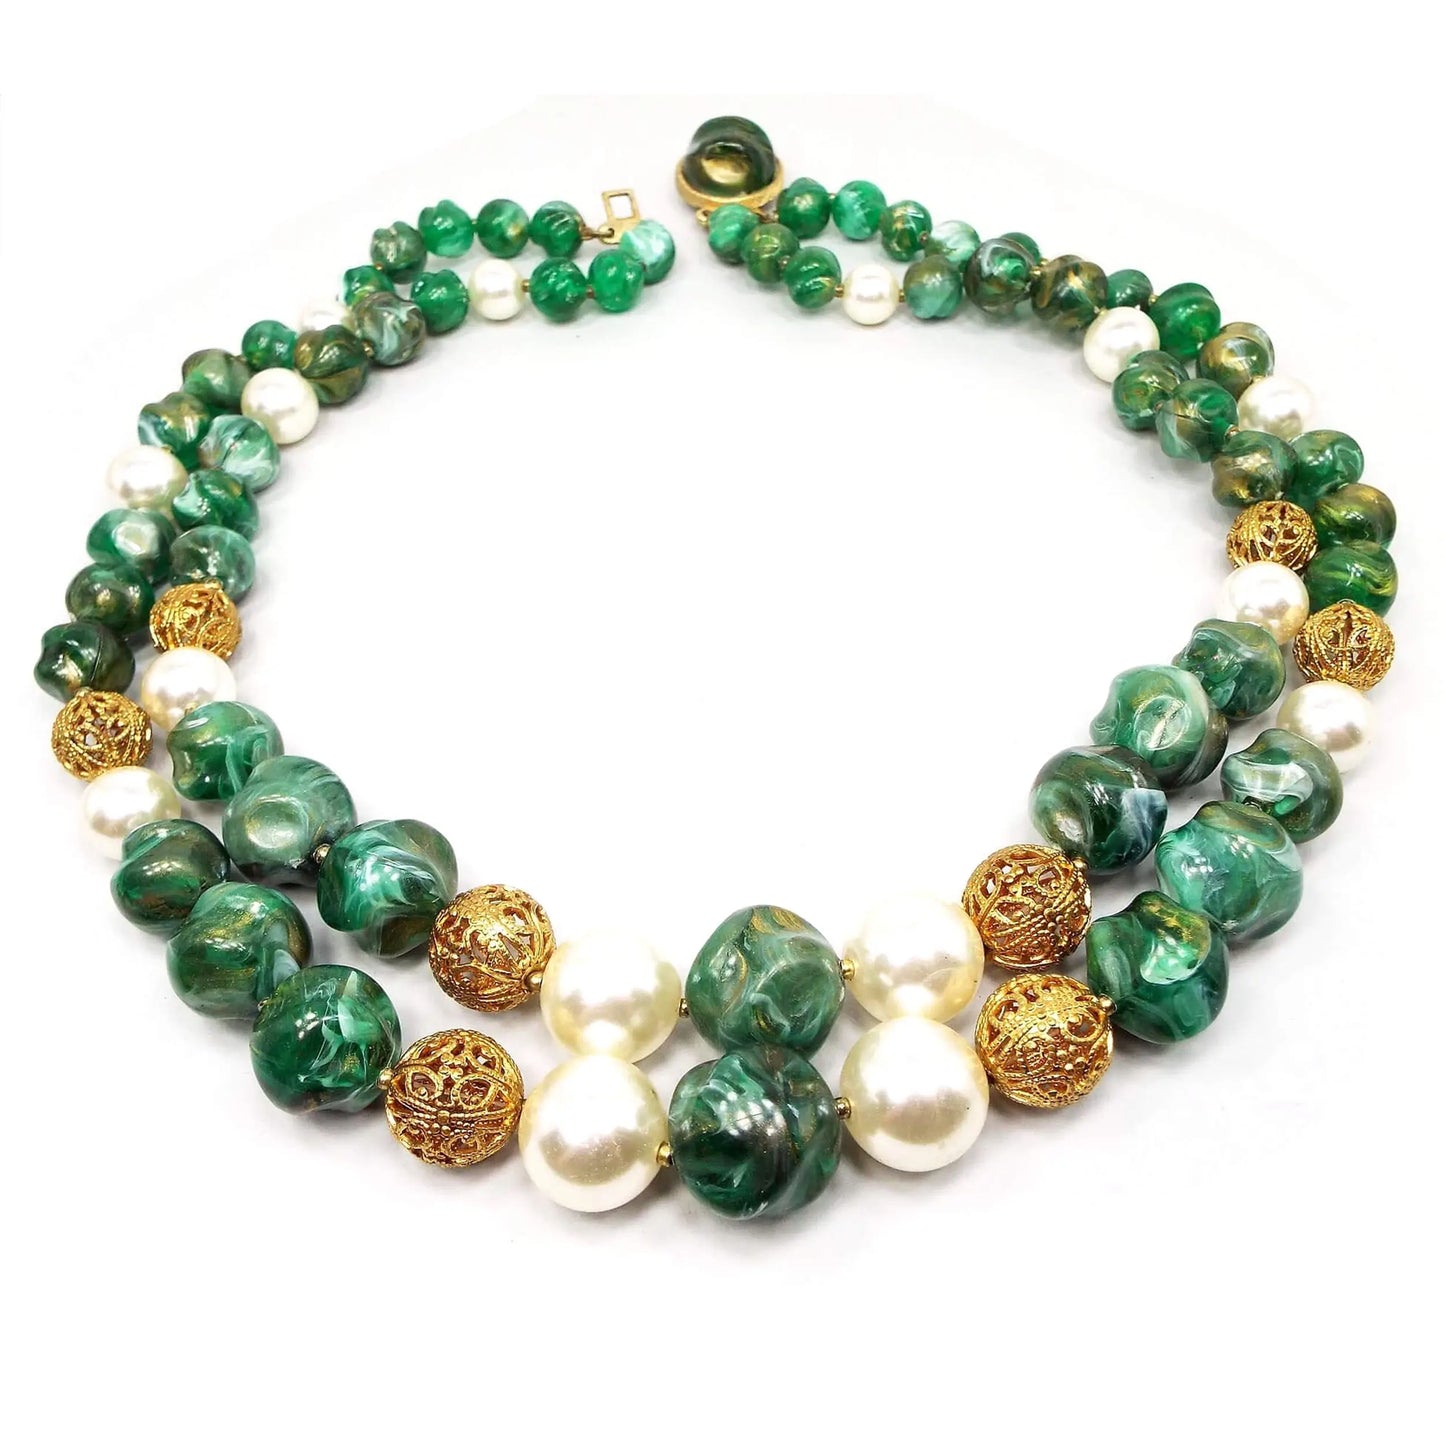 Angled view of the Mid Century vintage multi strand beaded necklace. There are two strands of chunky plastic beads that are shades of green with metallic gold swirled and marbled in. In between sets of those beads are plastic faux pearls and round gold tone plated filigree beads. There is a round clasp on the end with a domed cab that has the same coloring as the chunky beads. The metal components are gold tone plated in color.